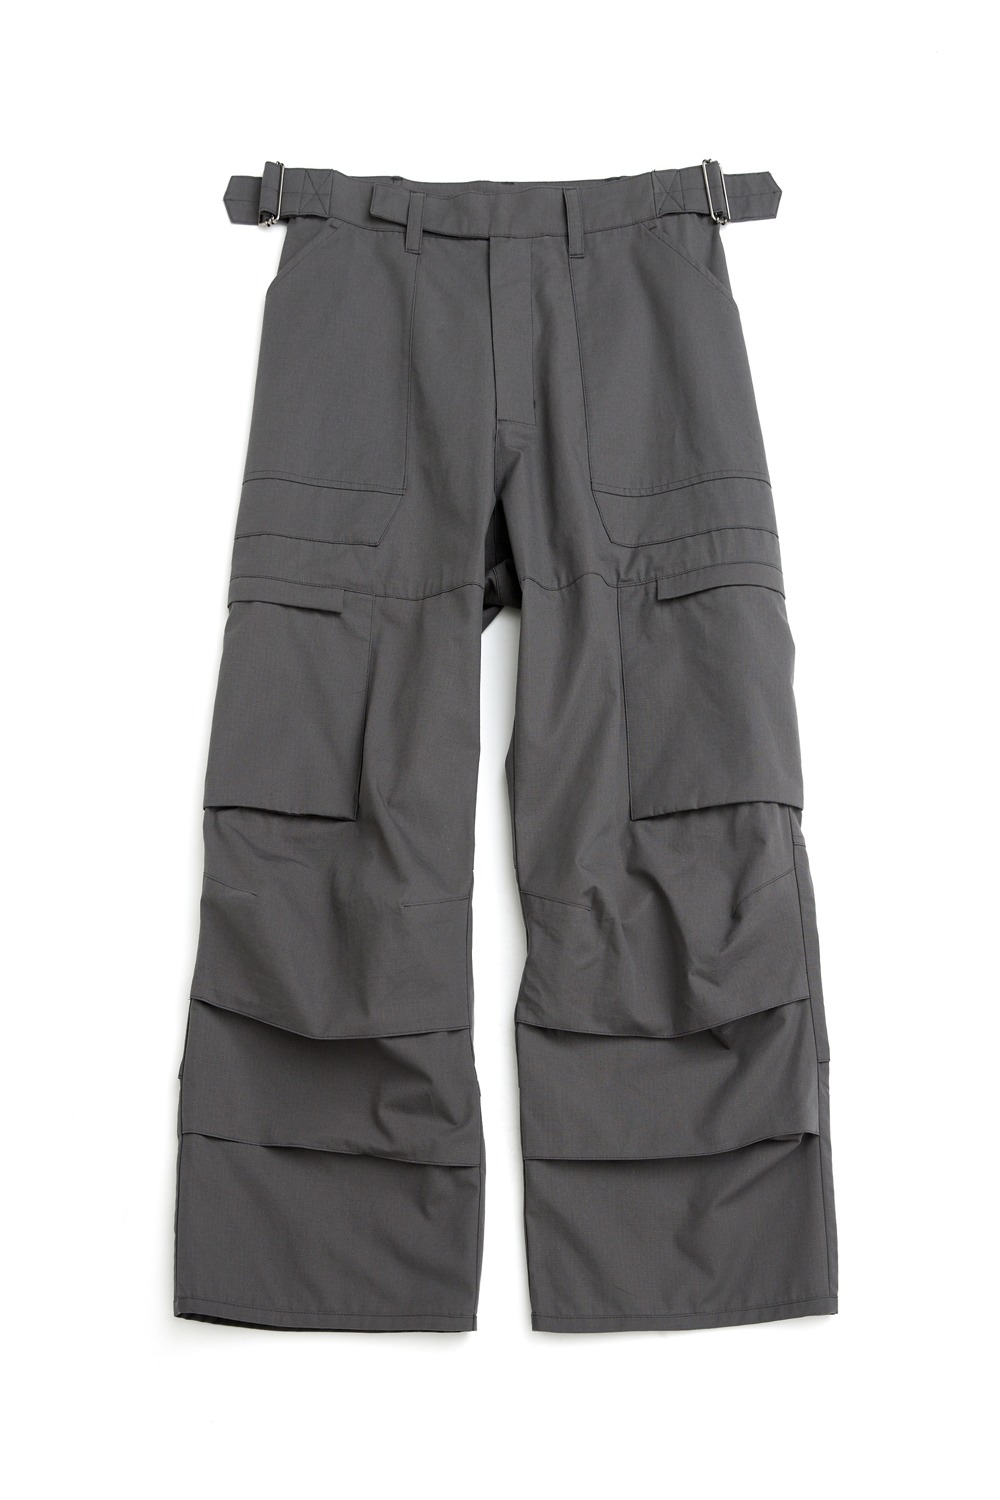 Fatigue Over Pants Ripstop Graphite